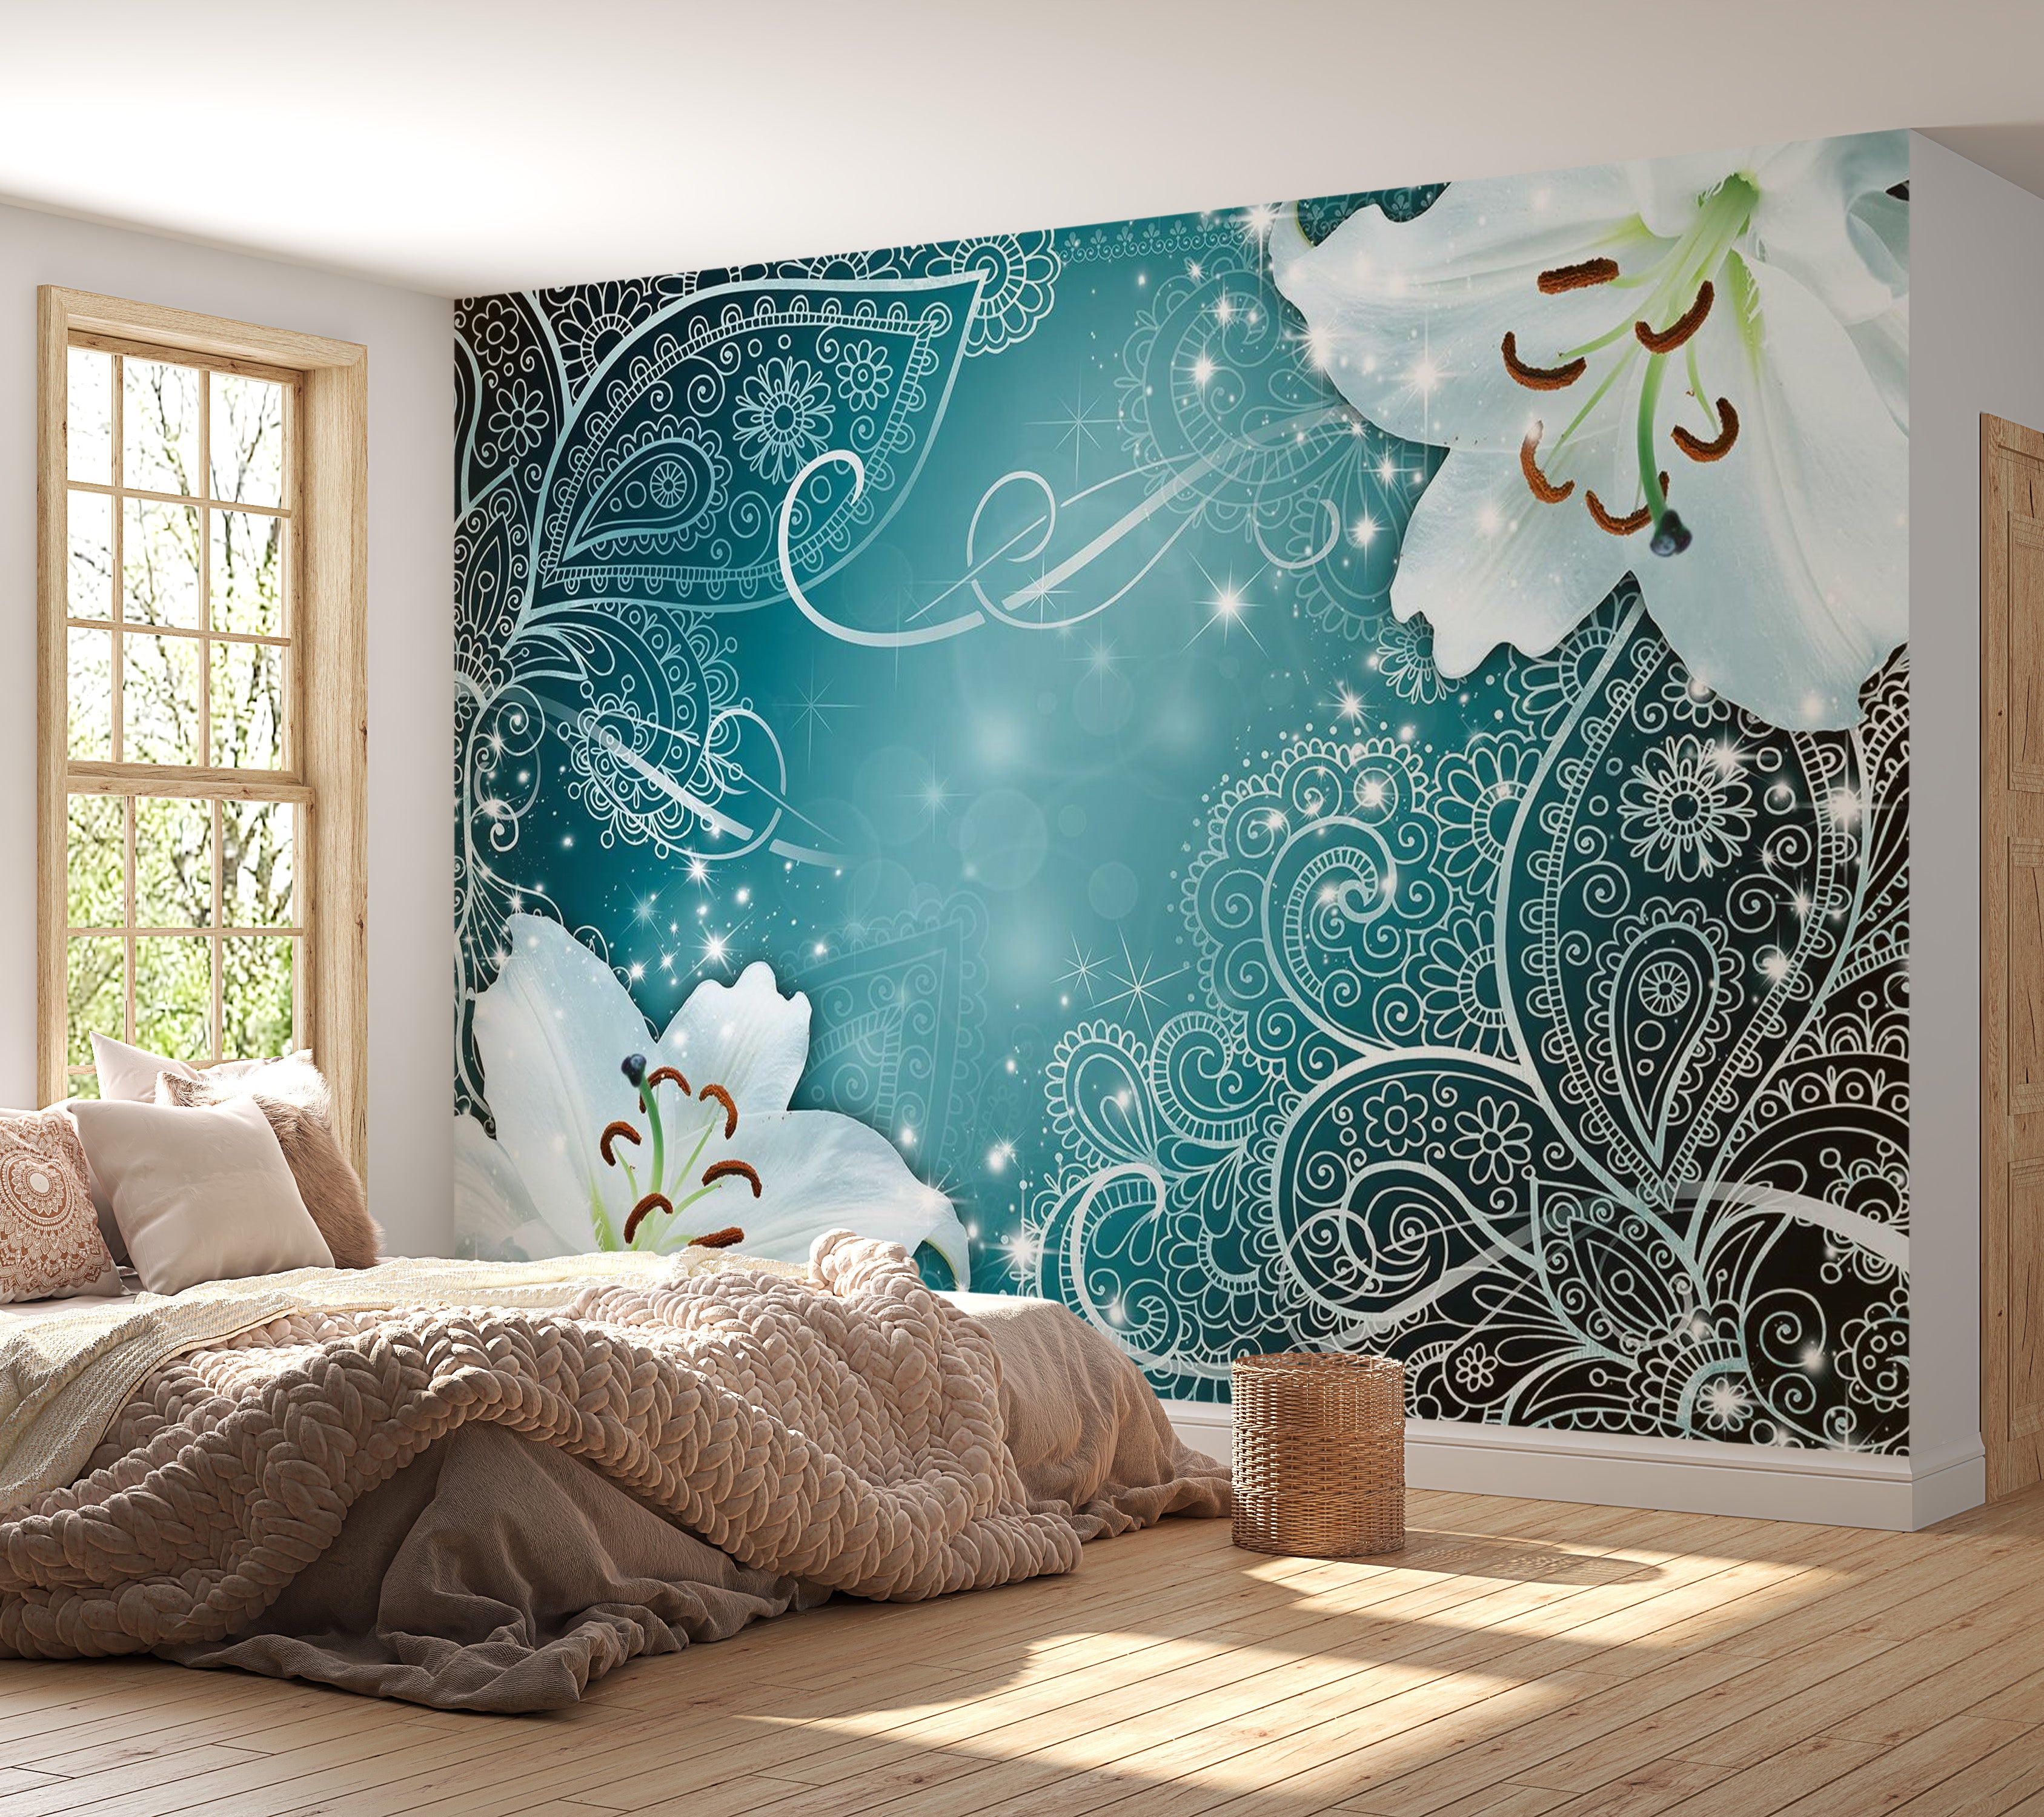 Peel & Stick Mandala Wall Mural - Mandala And Flowers Turquoise - Removable Wall Decals